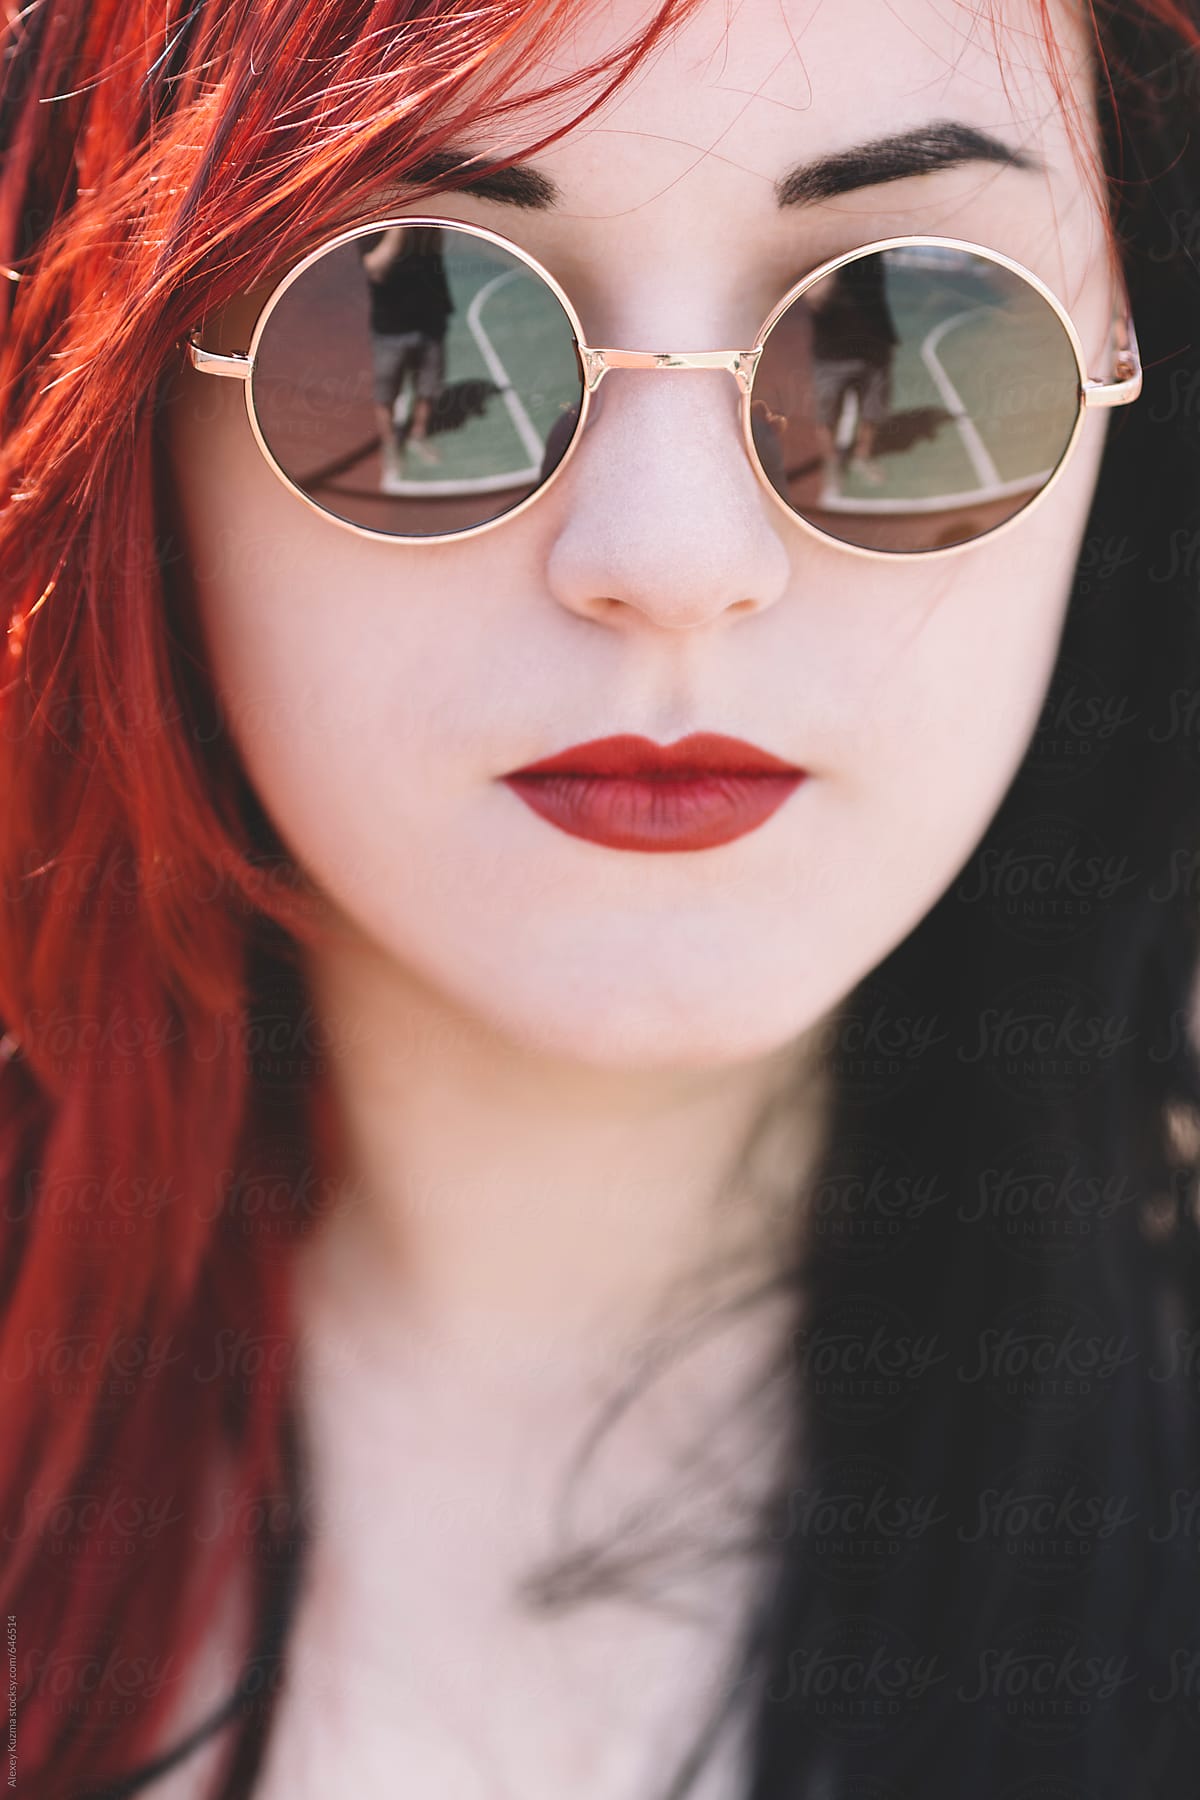 Young Woman With Red Hair By Stocksy Contributor Alexey Kuzma Stocksy 